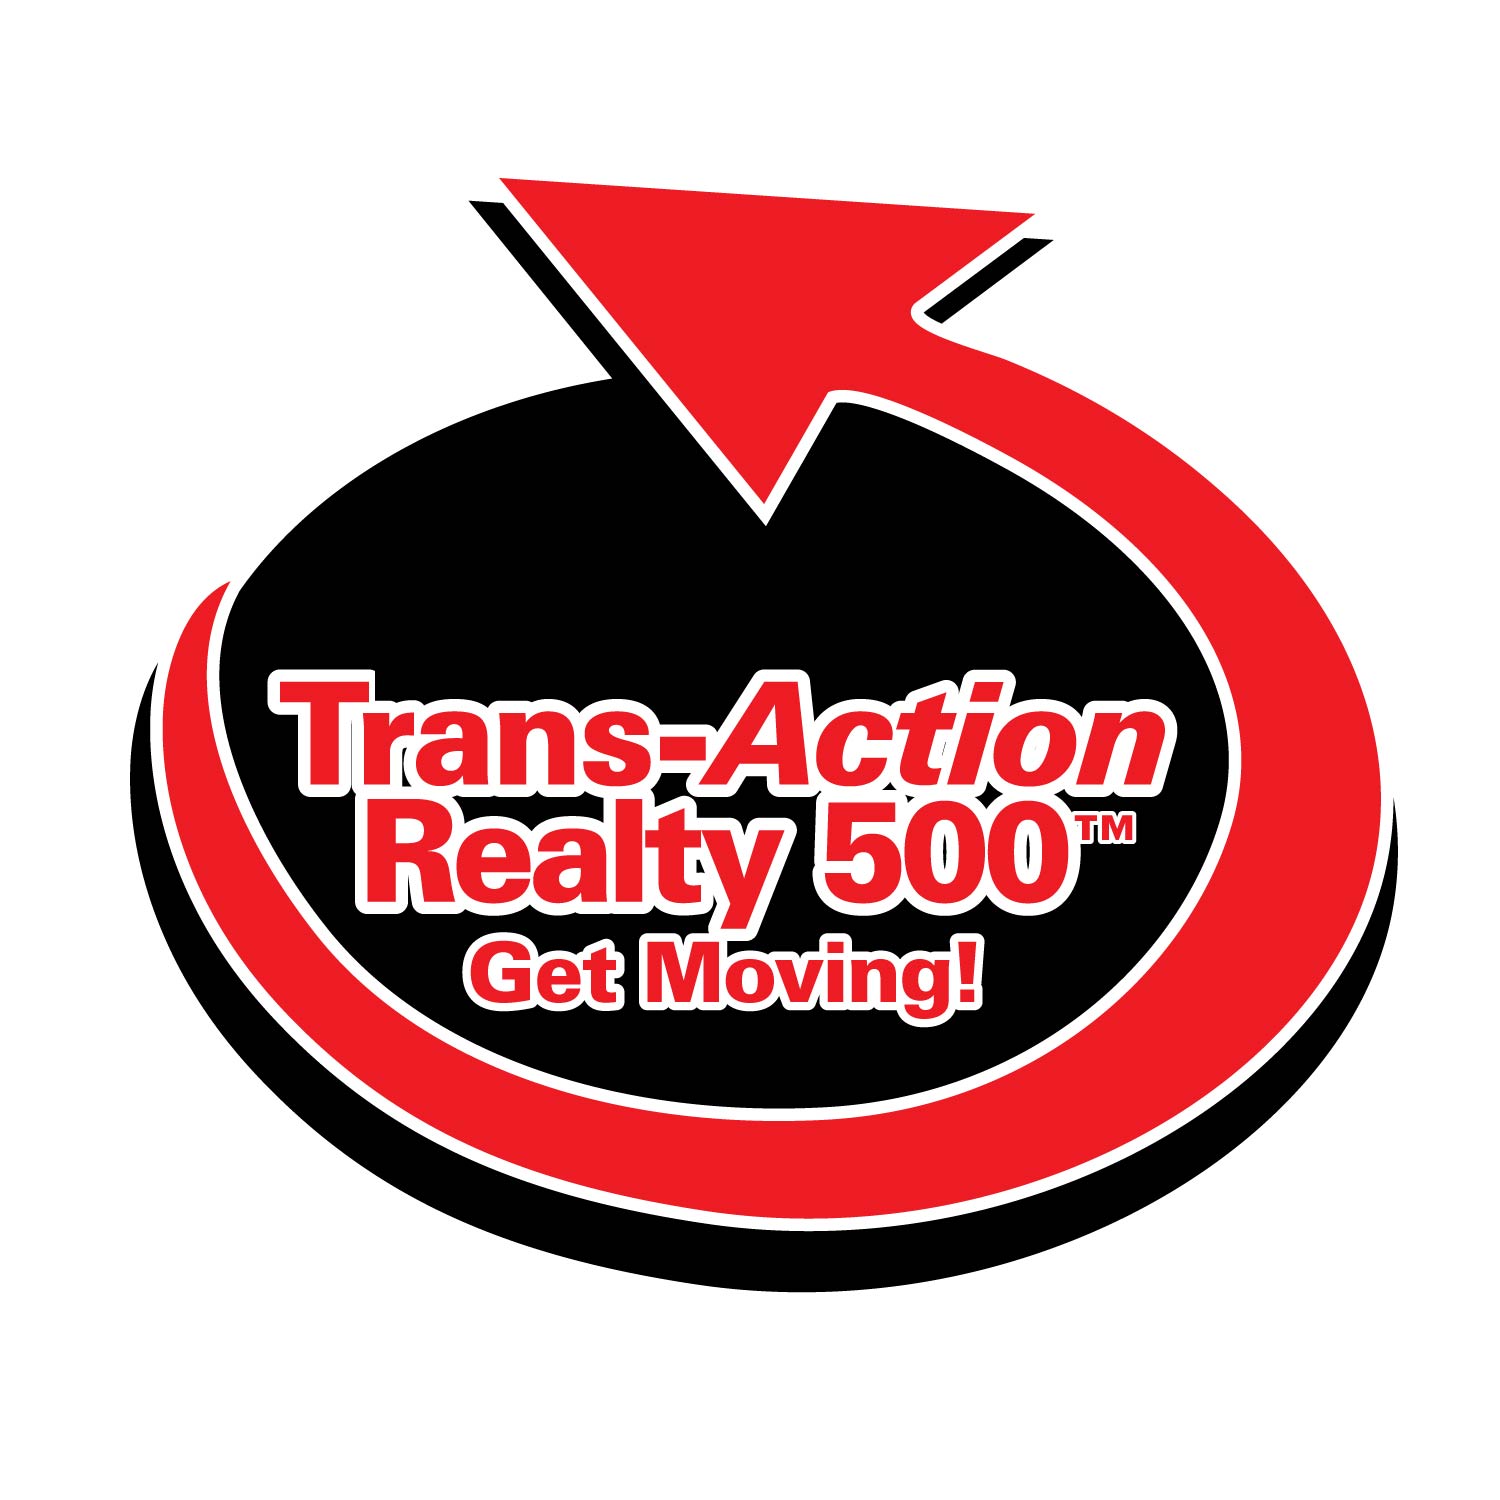 Trans-Action Realty 500